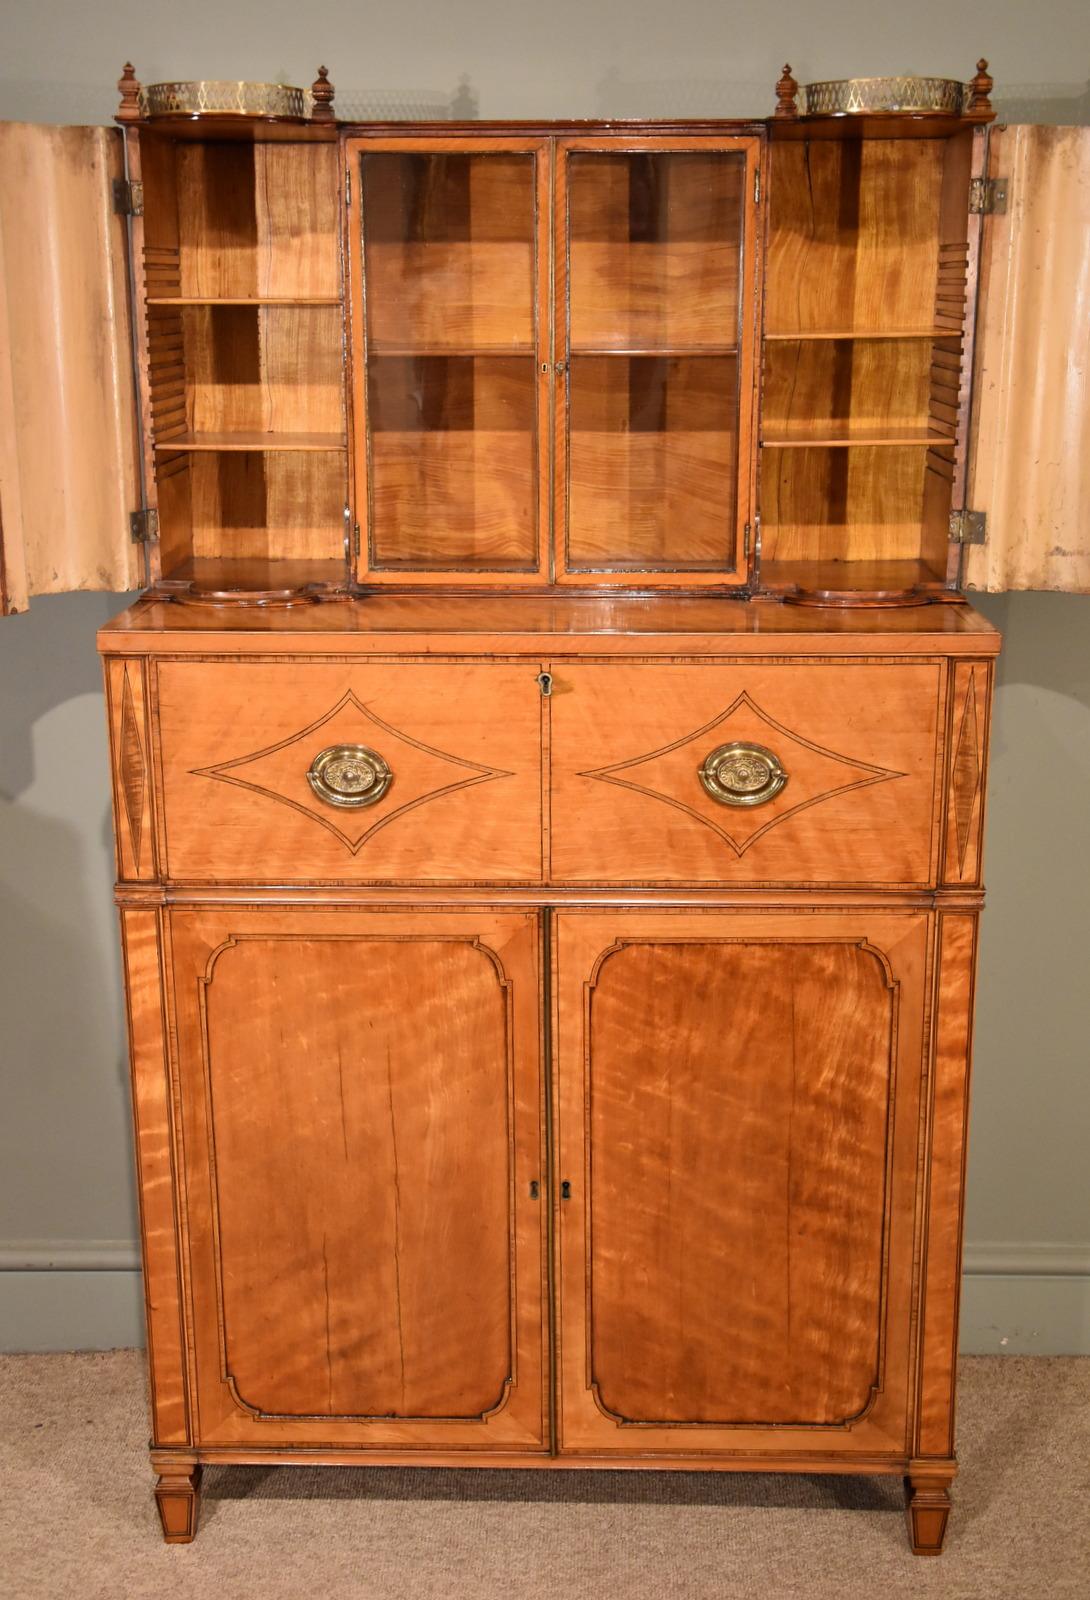 An early 19th century Secretaire cabinet in the manner of George Oakley, the upper gilt metal gallery over a pair of glazed cabinet doors flanked by barrel form cabinet doors enclosing adjustable shelves. The Secretaire cabinet is fitted with solid